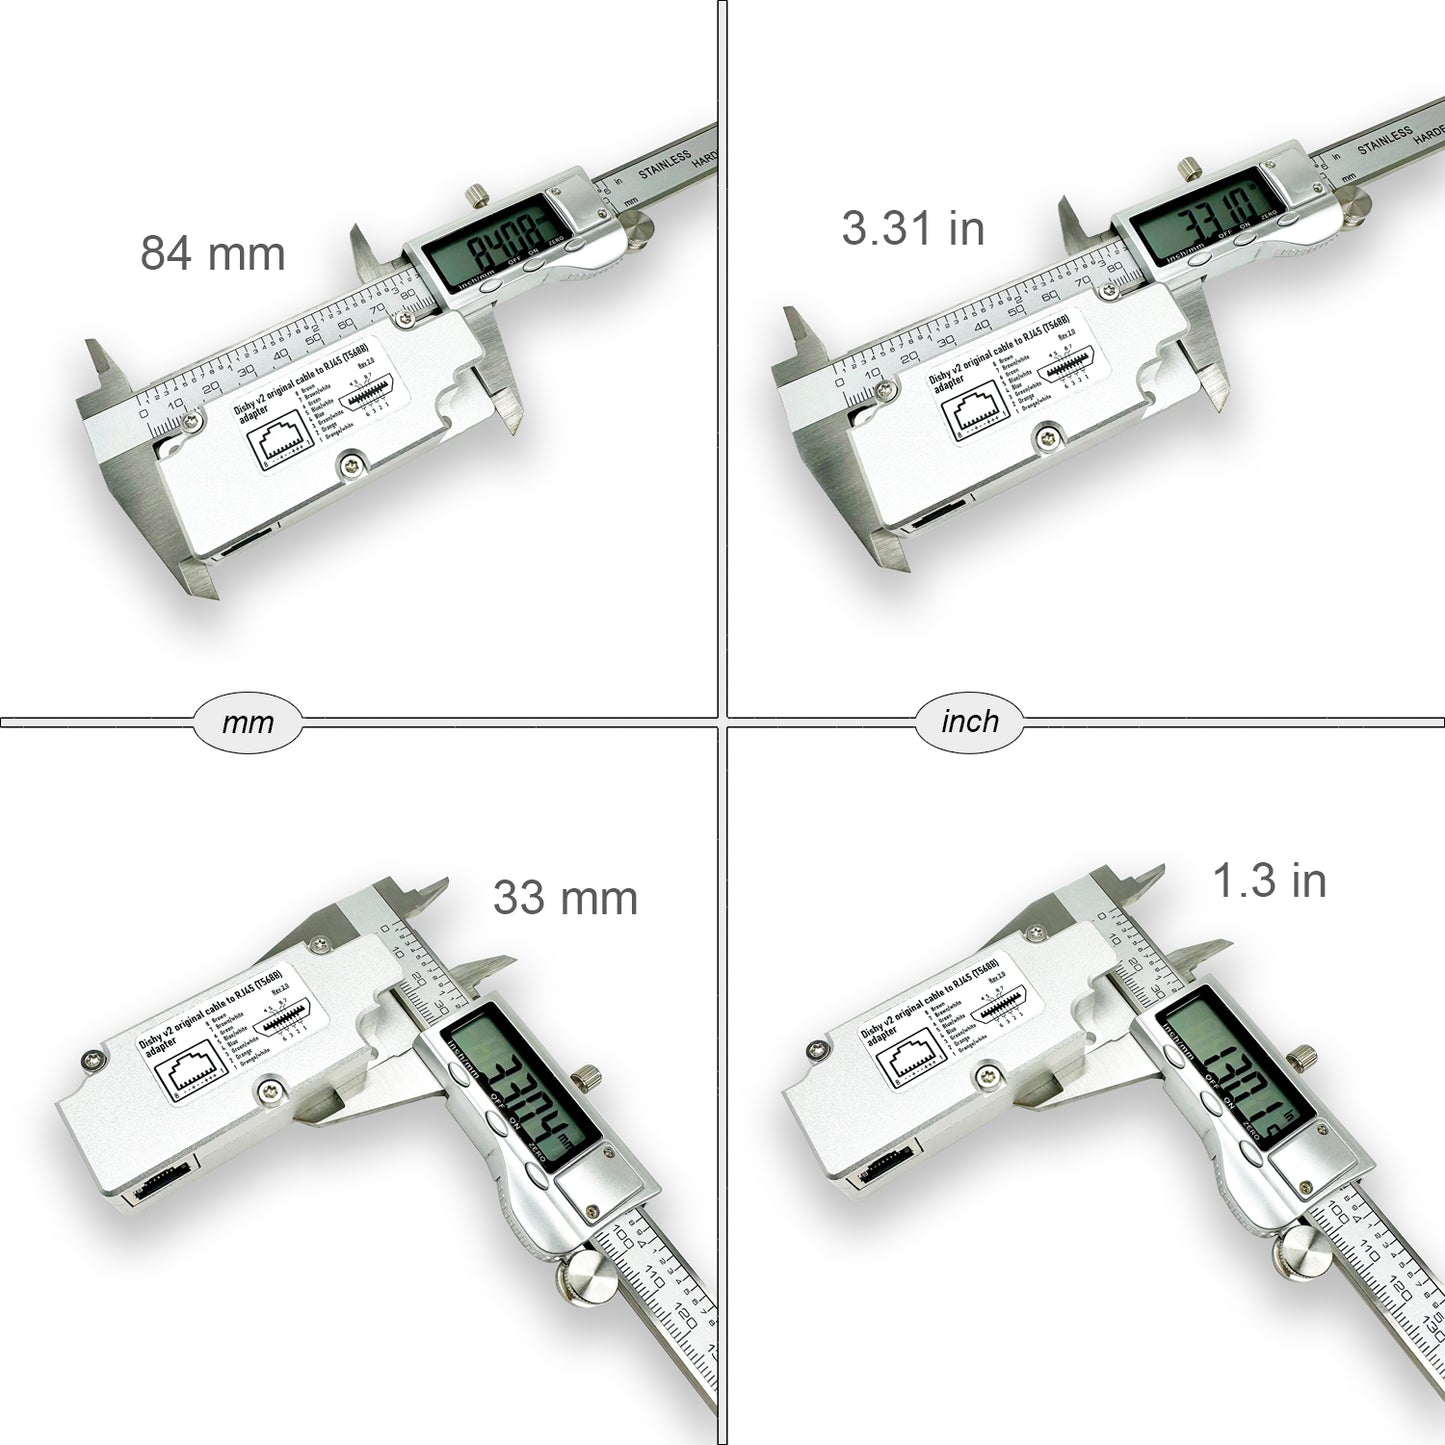 Standard Actuated Starlink original cable to RJ45 adapter. For Dishy V2.